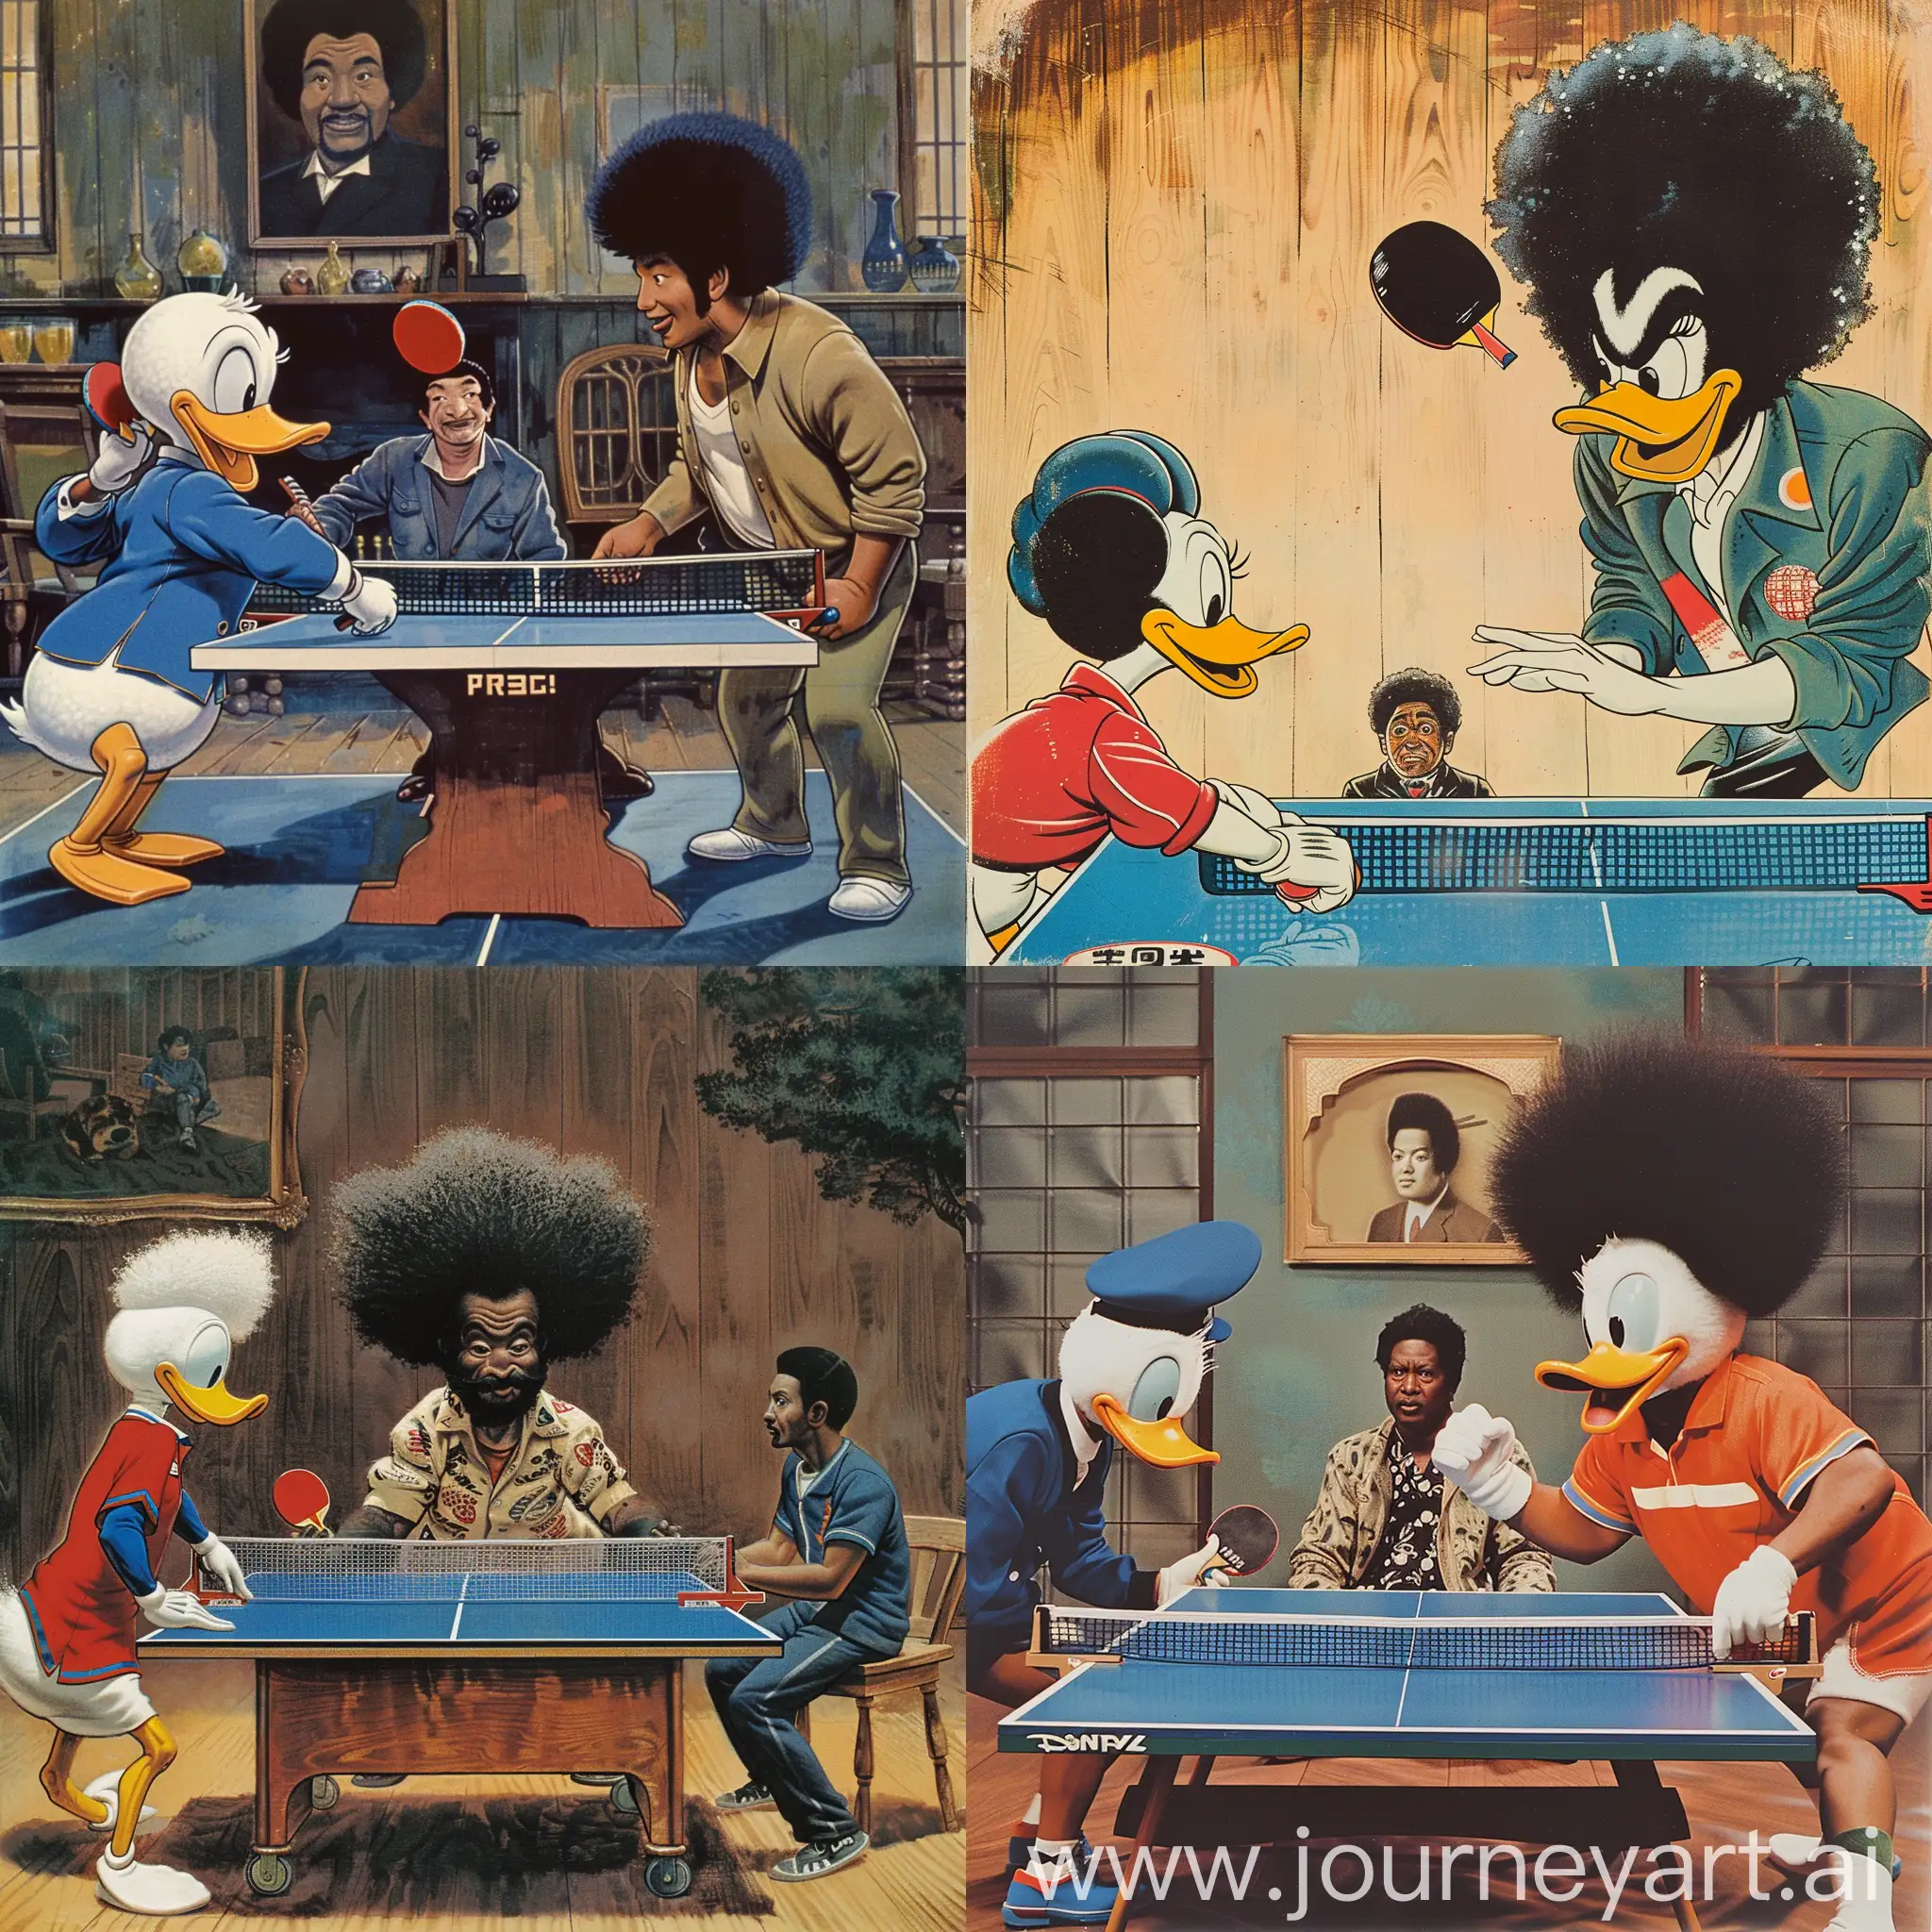 Donald-Duck-Engages-in-Table-Tennis-Match-with-Diverse-Competitors